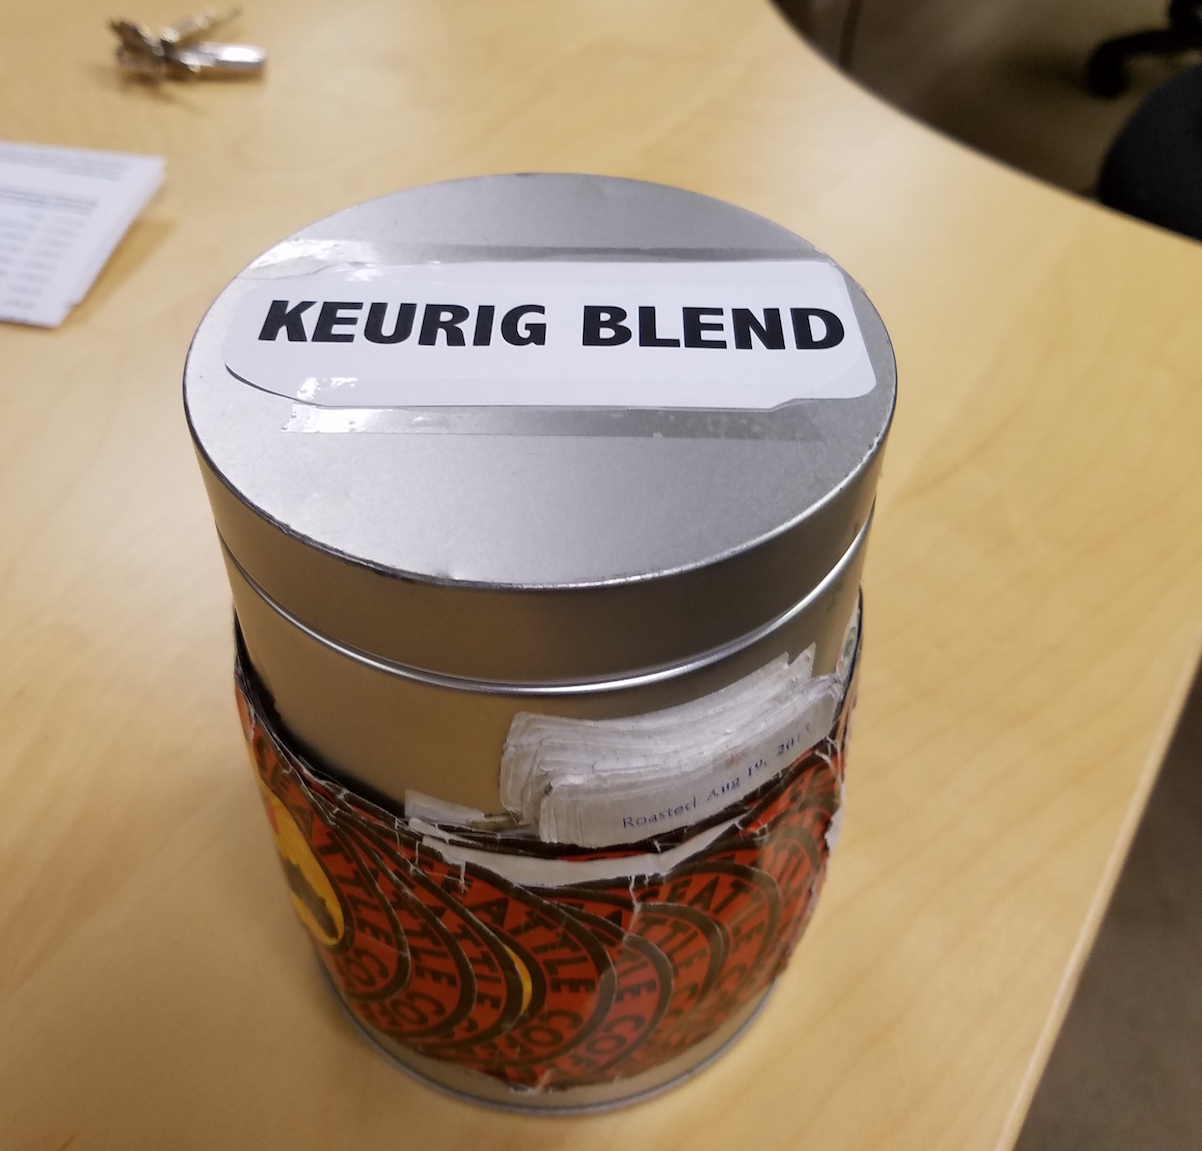 Closed coffee can with printed 'Keurig Blend' label on top